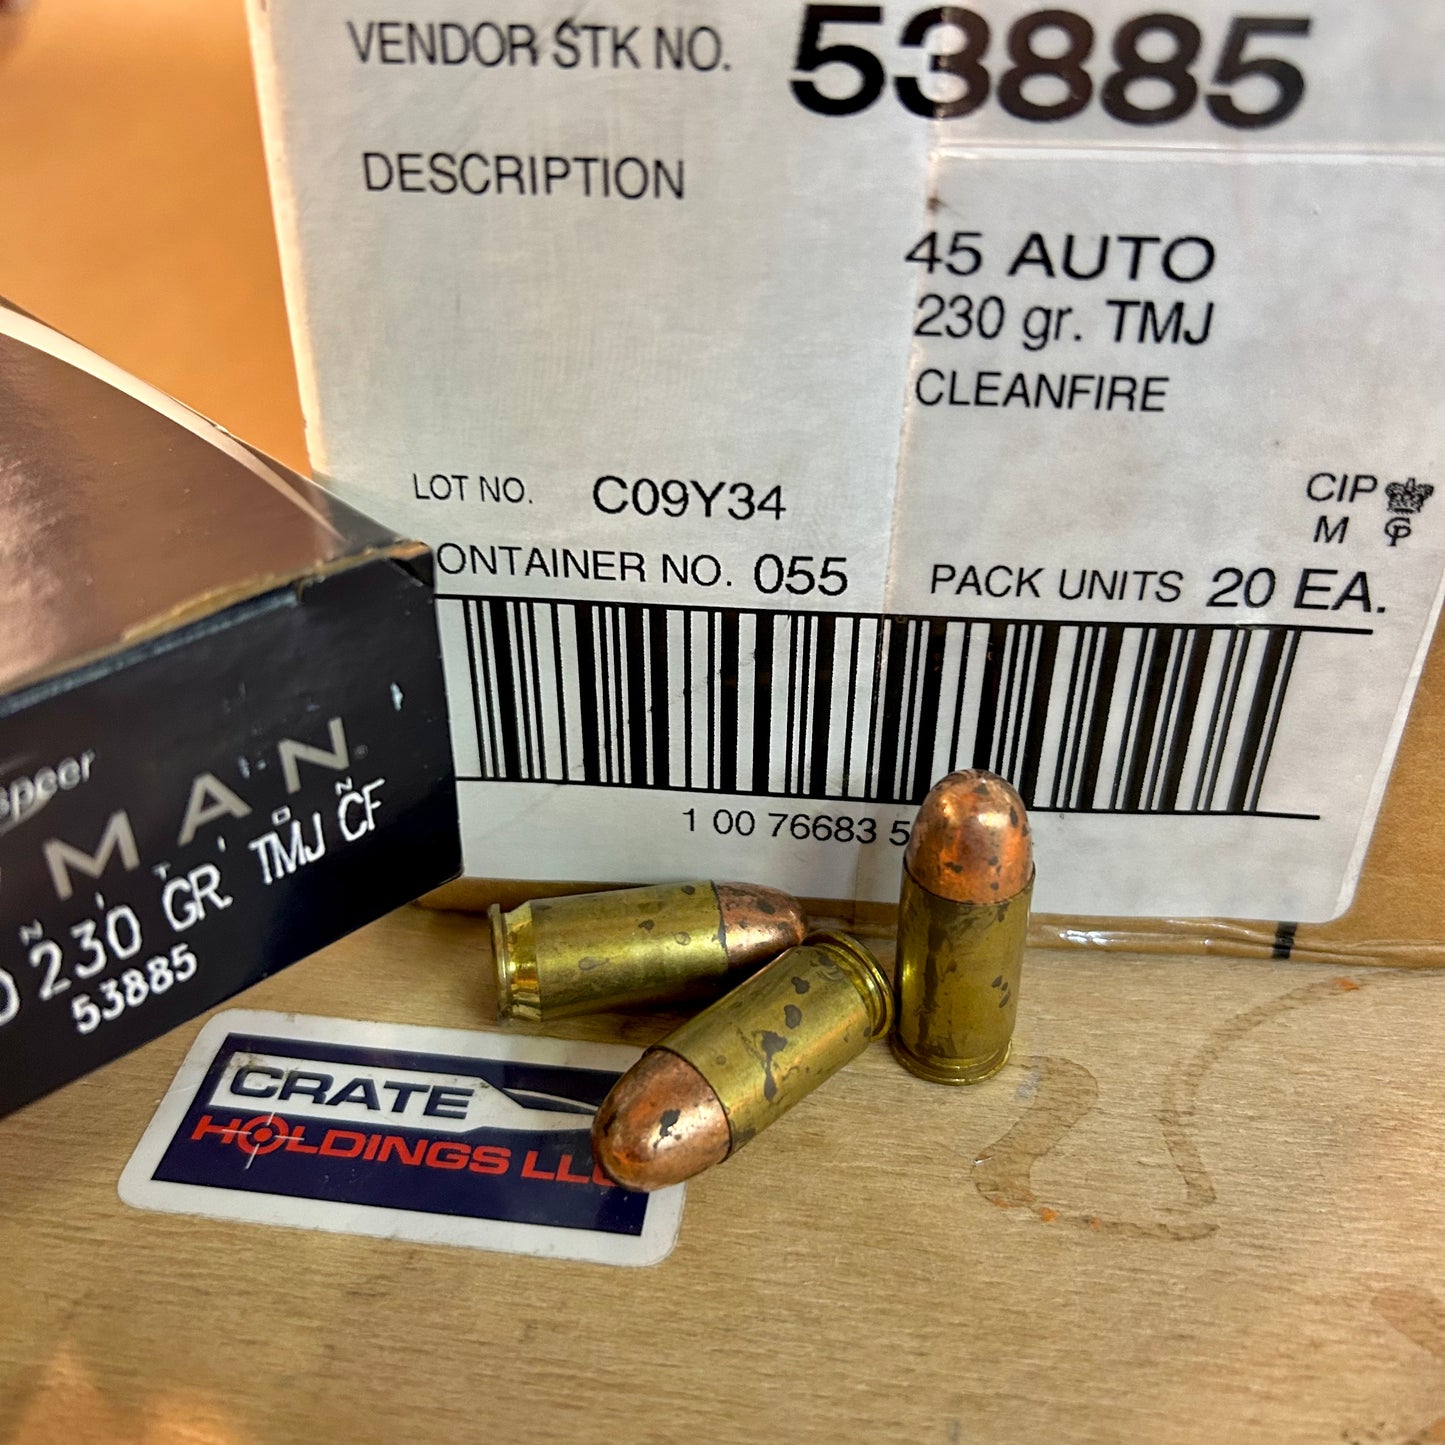 Free Shipping - 1000 Round Case Speer Lawman Cleanfire .45 ACP / Auto Ammo 230gr TMJ (LE Trade) New - 53885